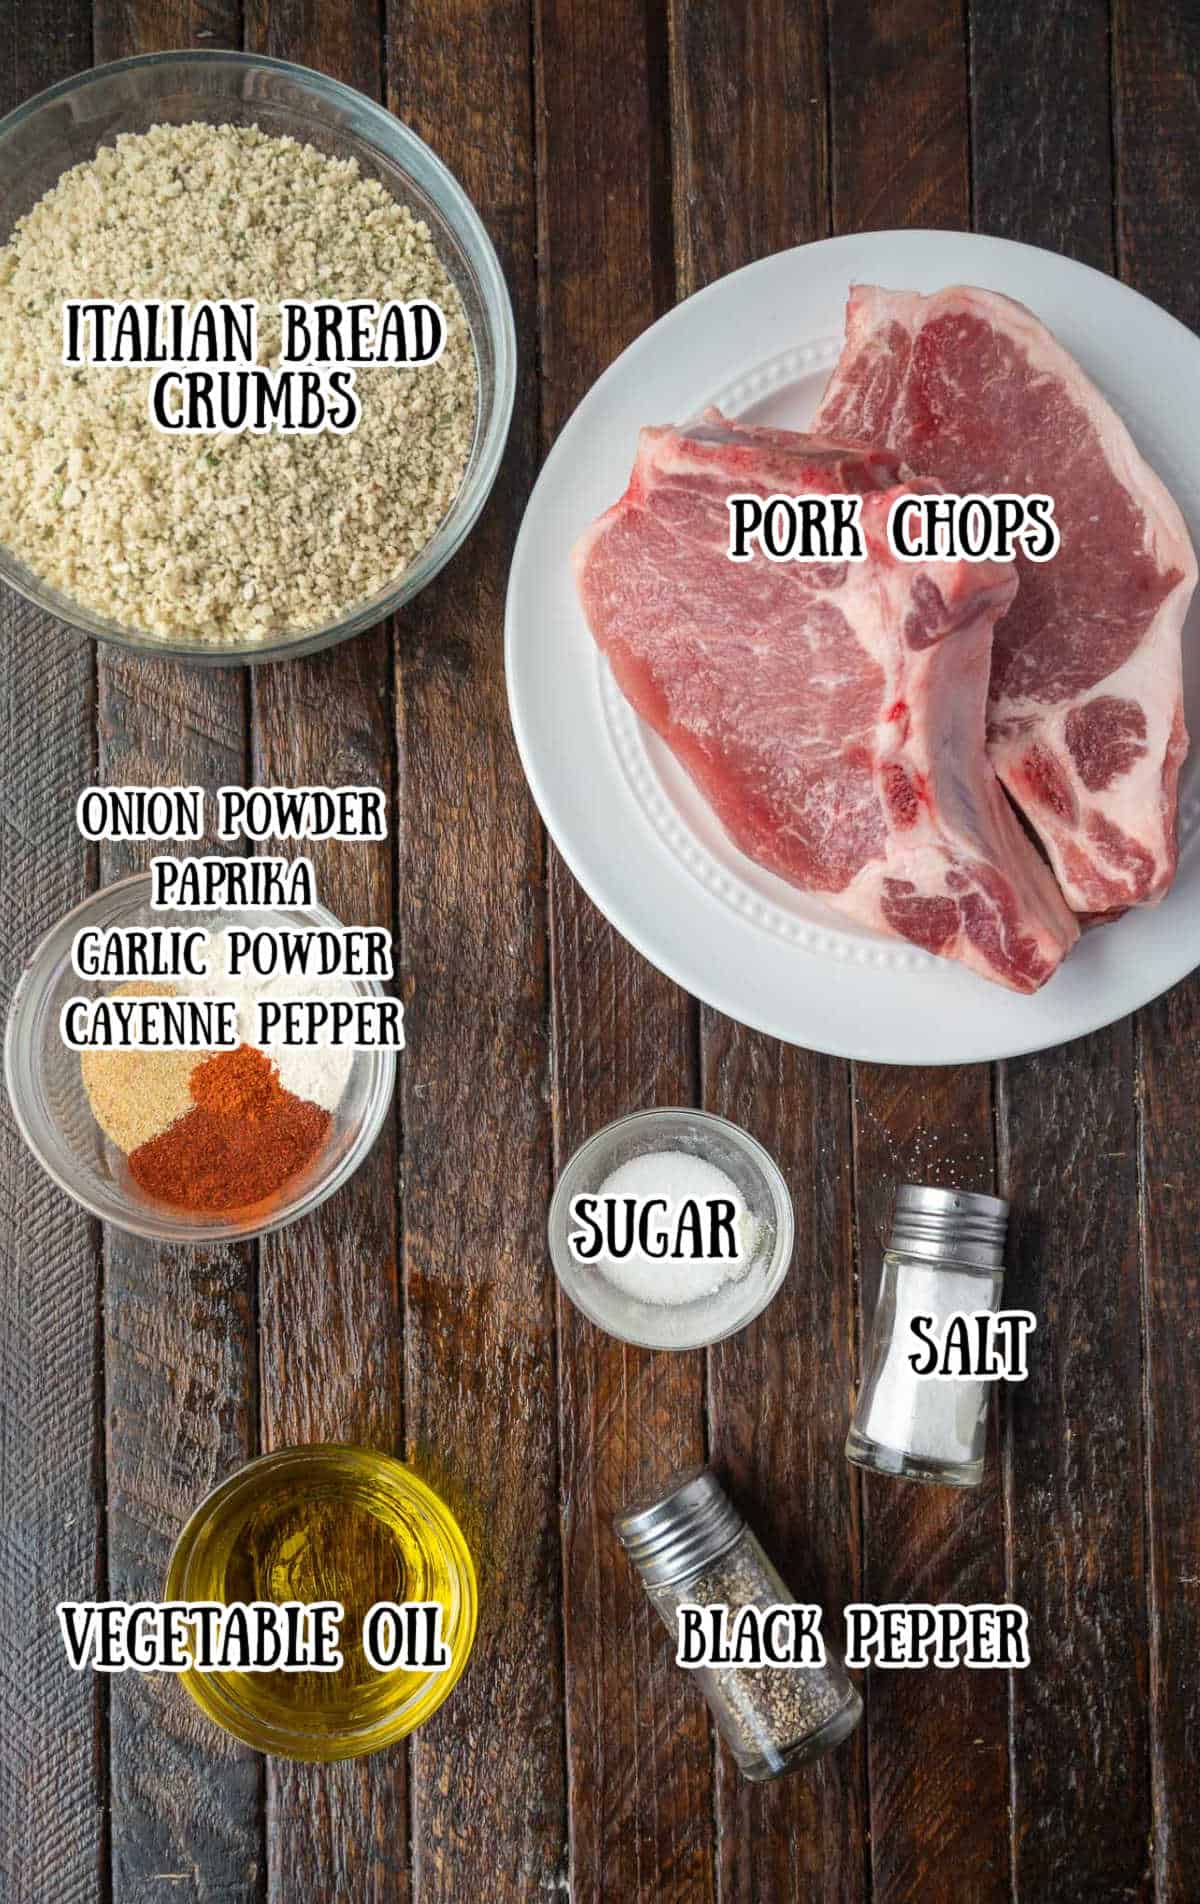 all the ingredients needed for this recipe.